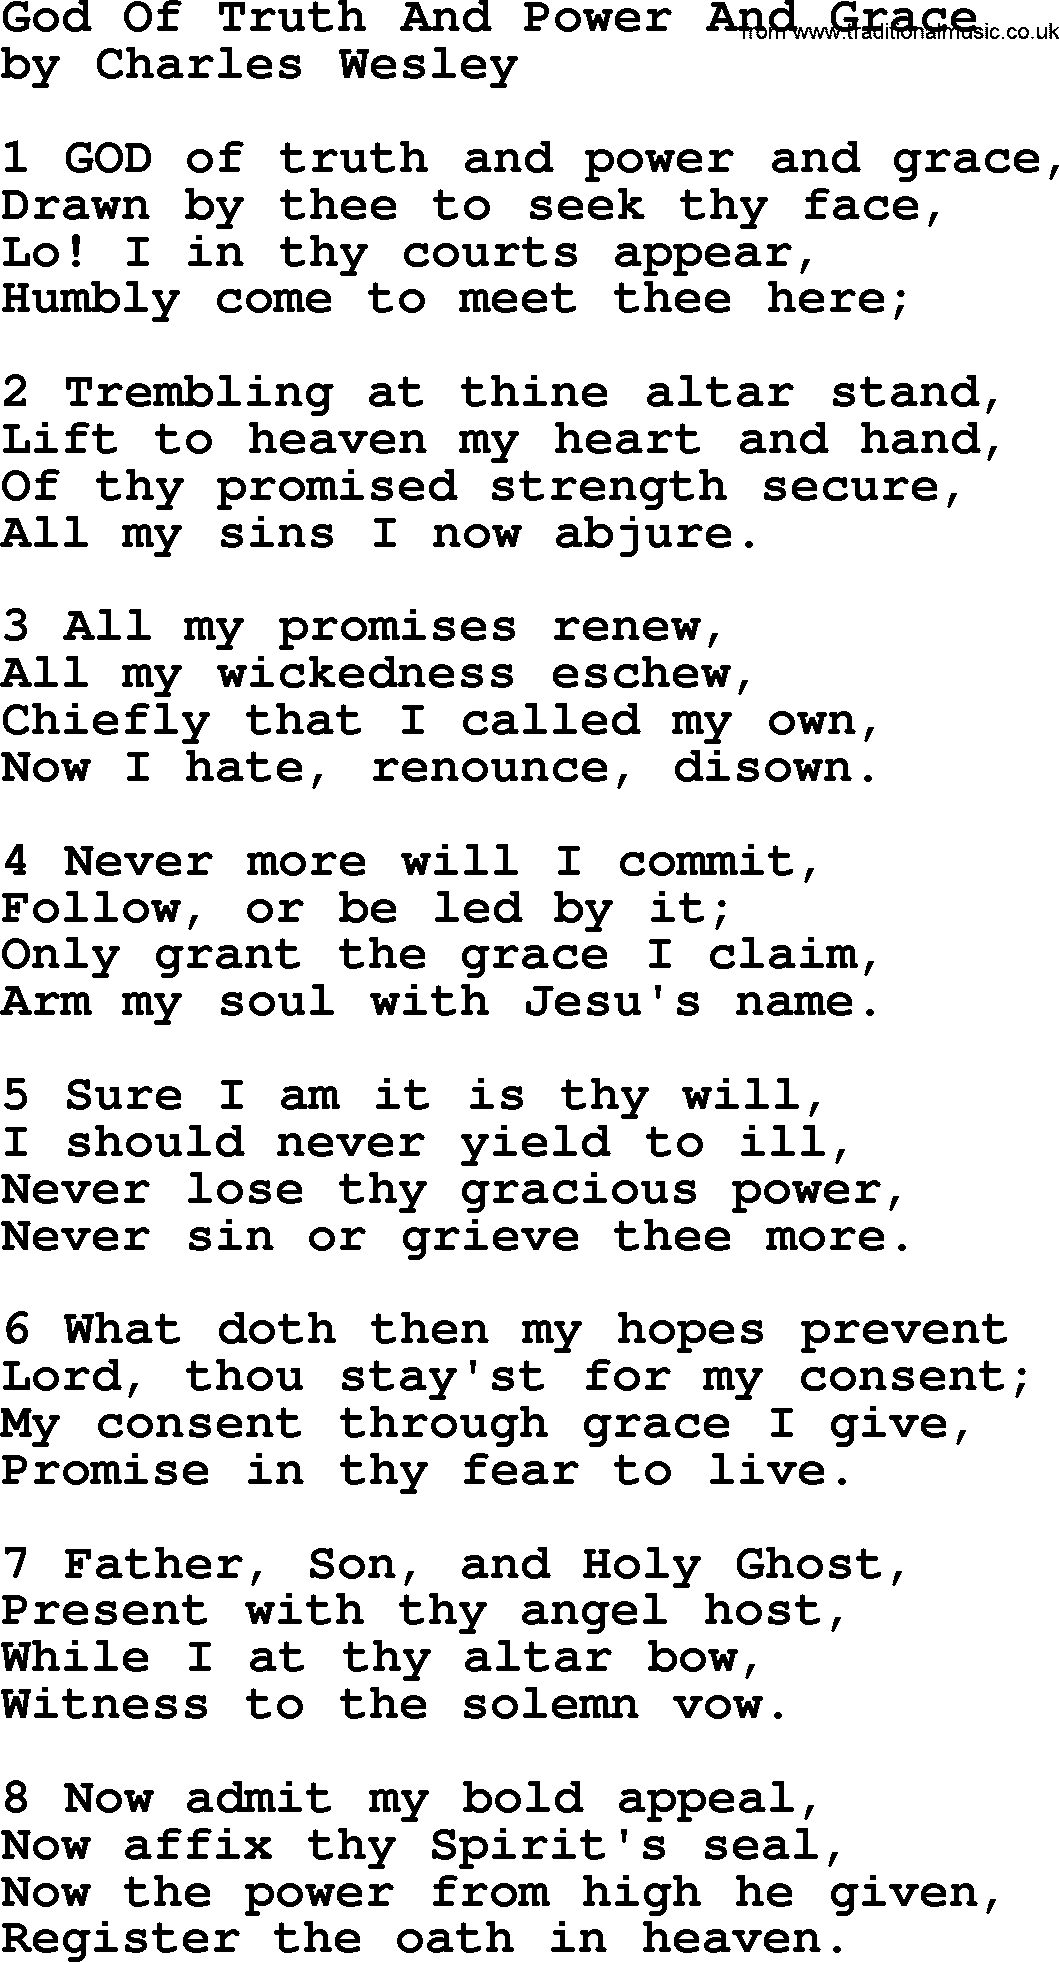 Charles Wesley hymn: God Of Truth And Power And Grace, lyrics